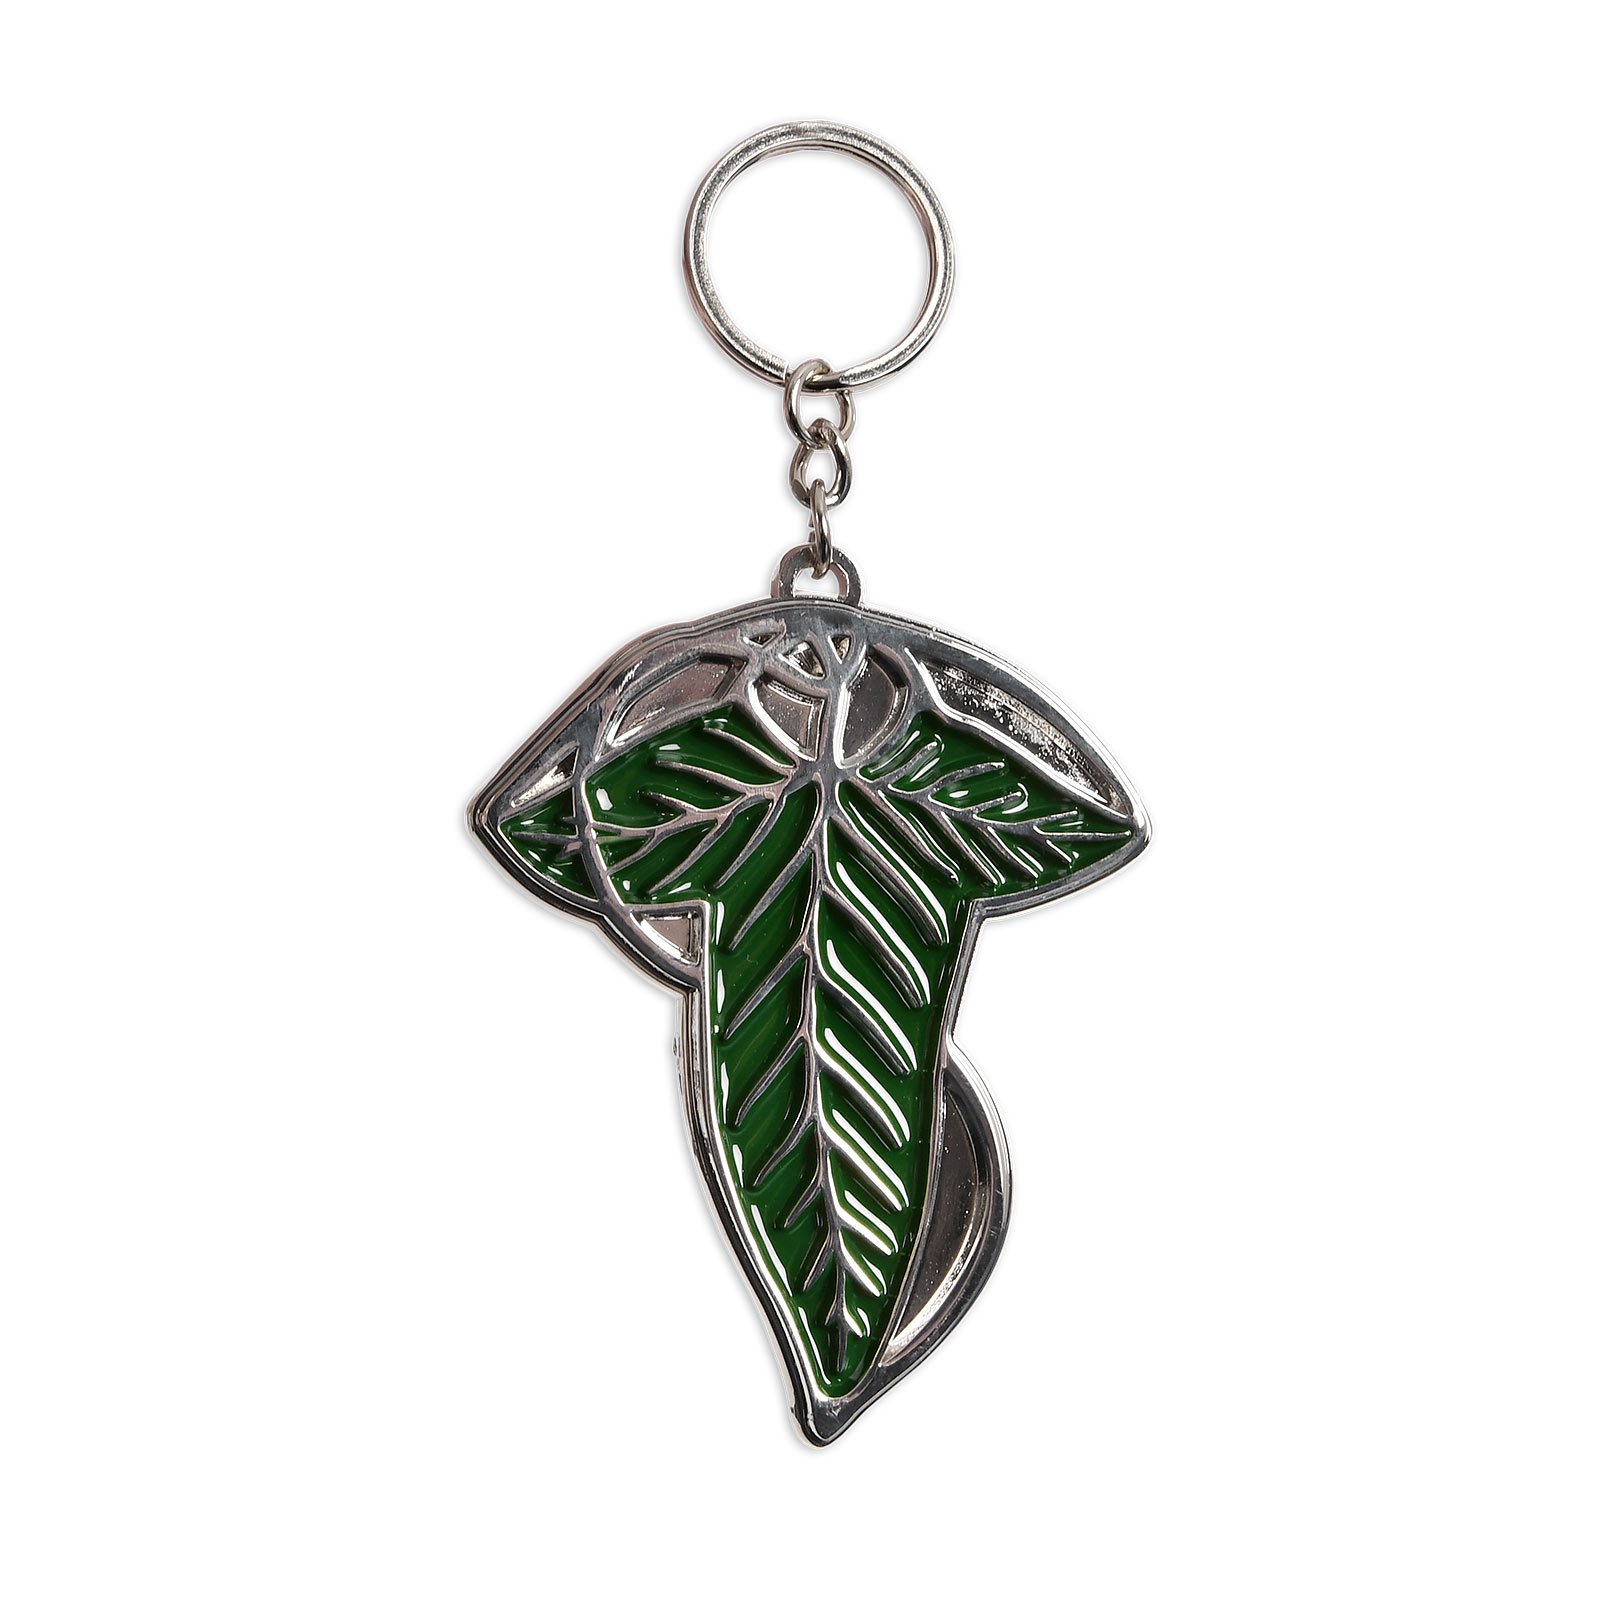 Lord of the Rings - Leaf Brooch Keychain